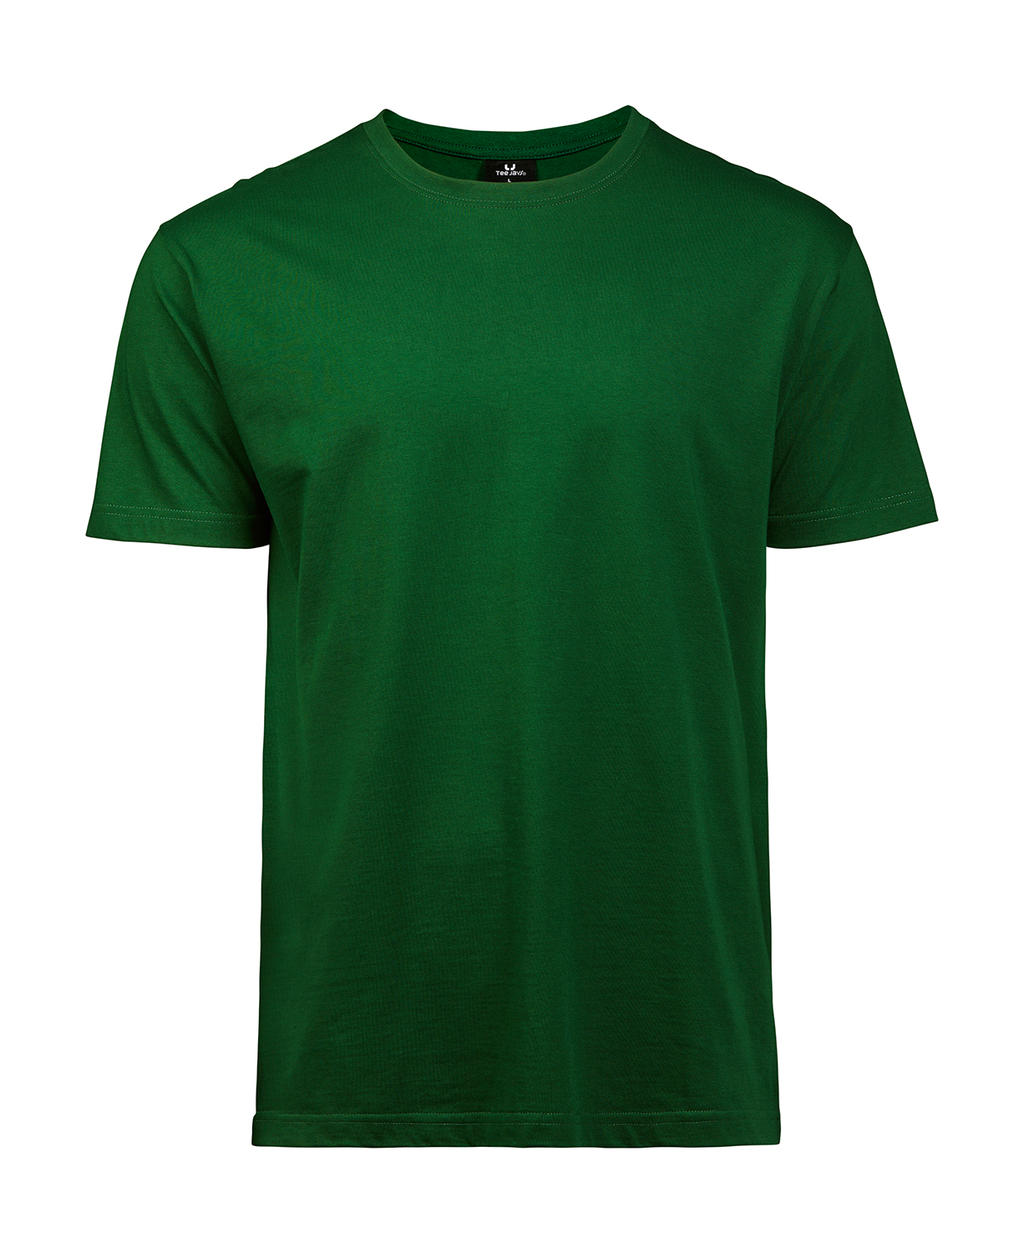  Sof Tee in Farbe Forest Green